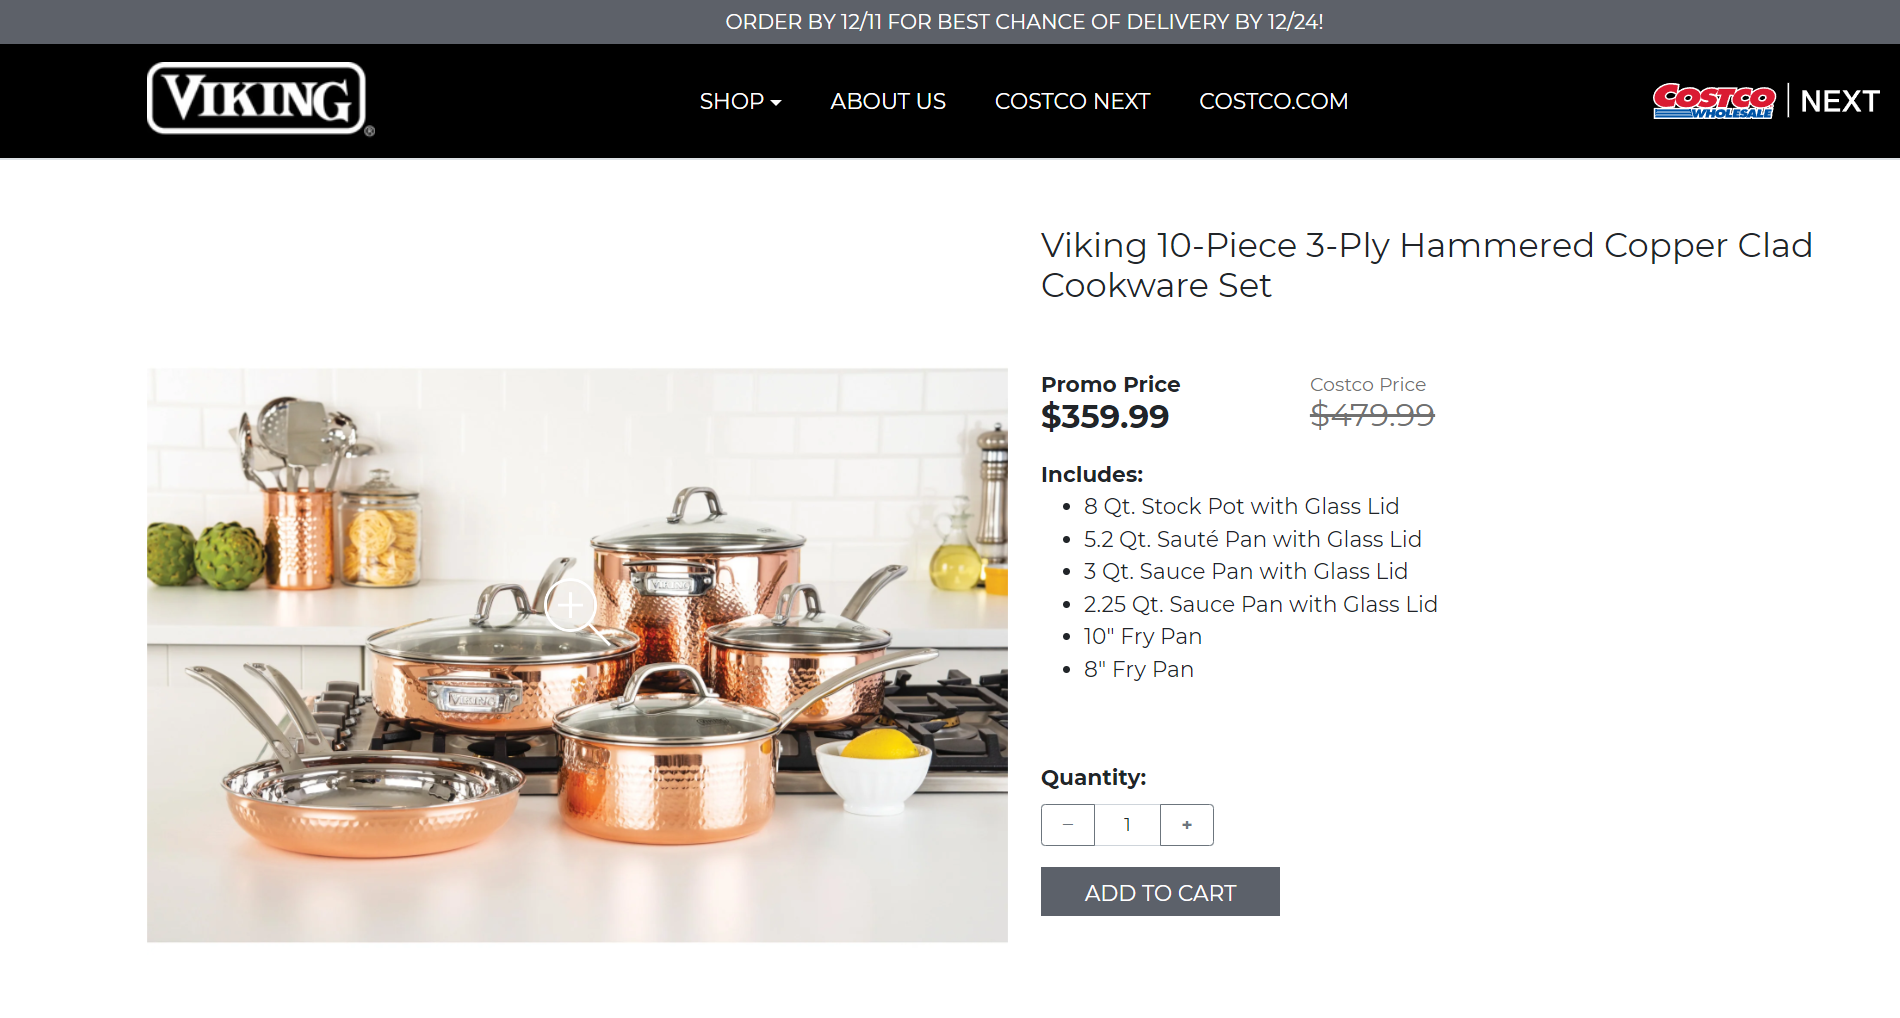 Viking 10-Piece 3-Ply Hammered Copper Clad Cookware Set Costco Members $360